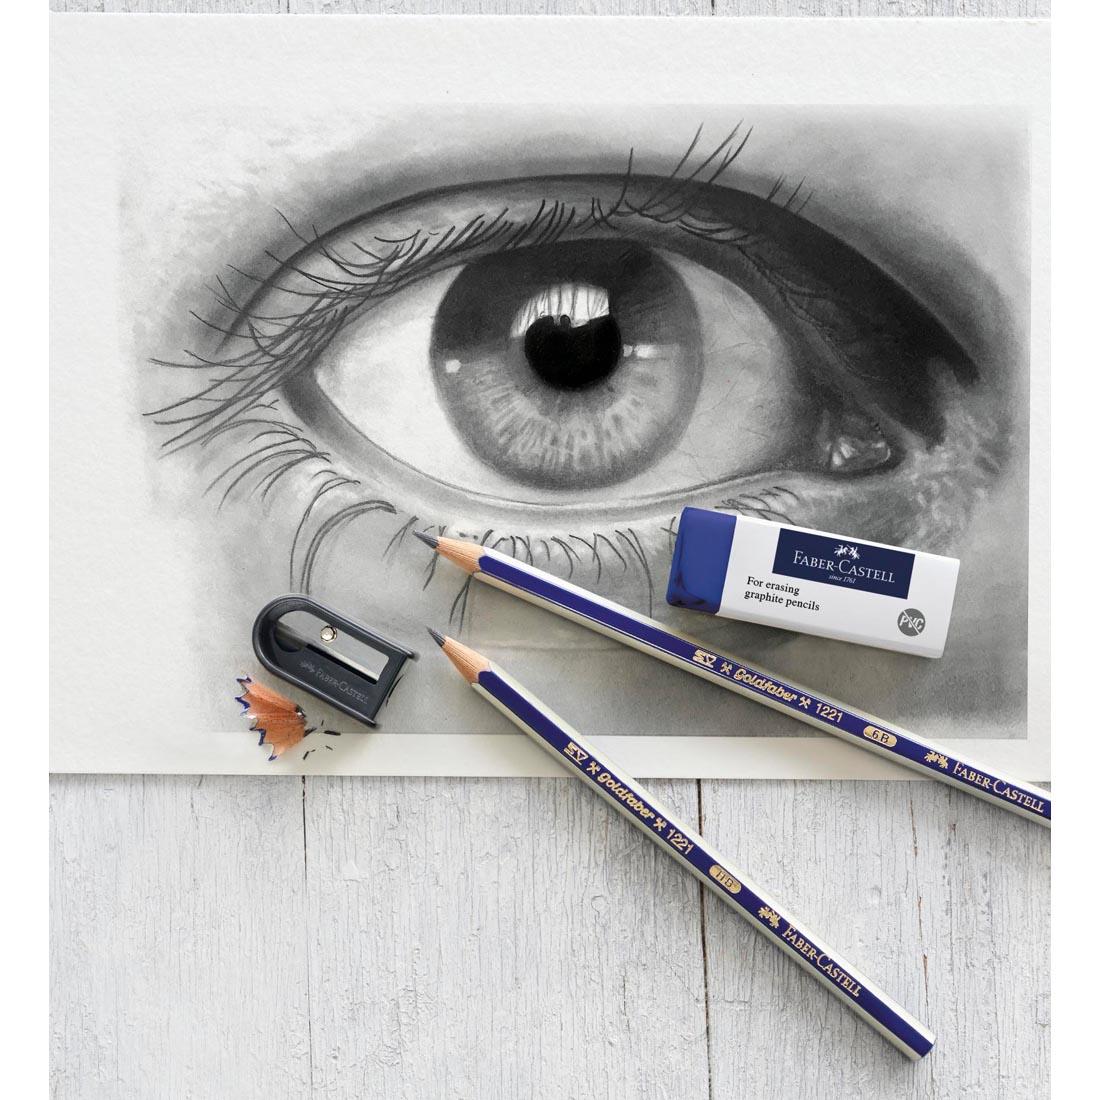 2 GoldFaber Graphite Pencils, an Eraser and a Sharpener, shown on top of a drawing of an eye